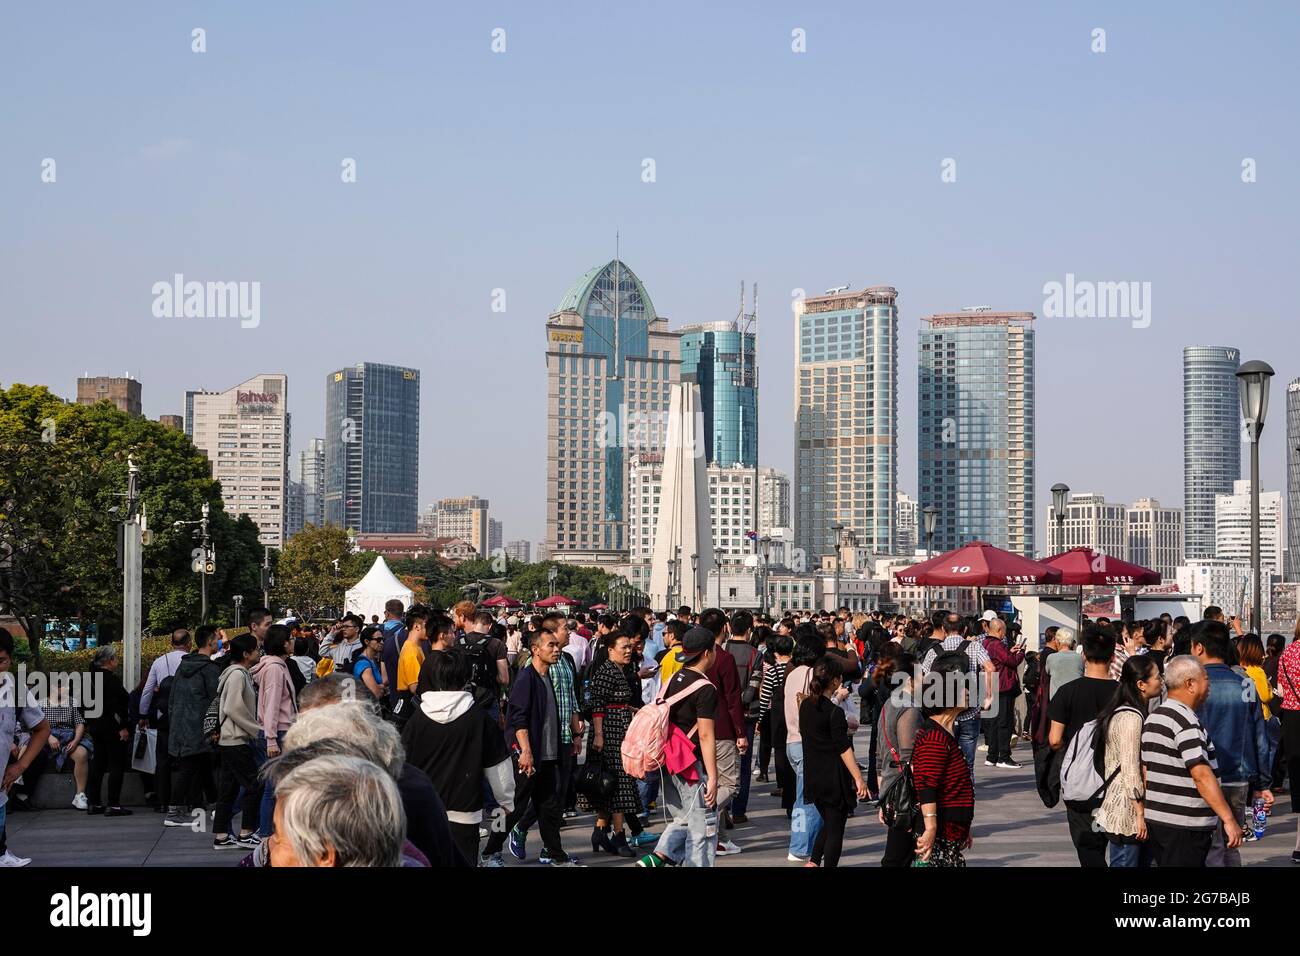 View from The Bund to the skyline of the Pudong Special Economic Zone, Shanghai, People's Republic of China Stock Photo